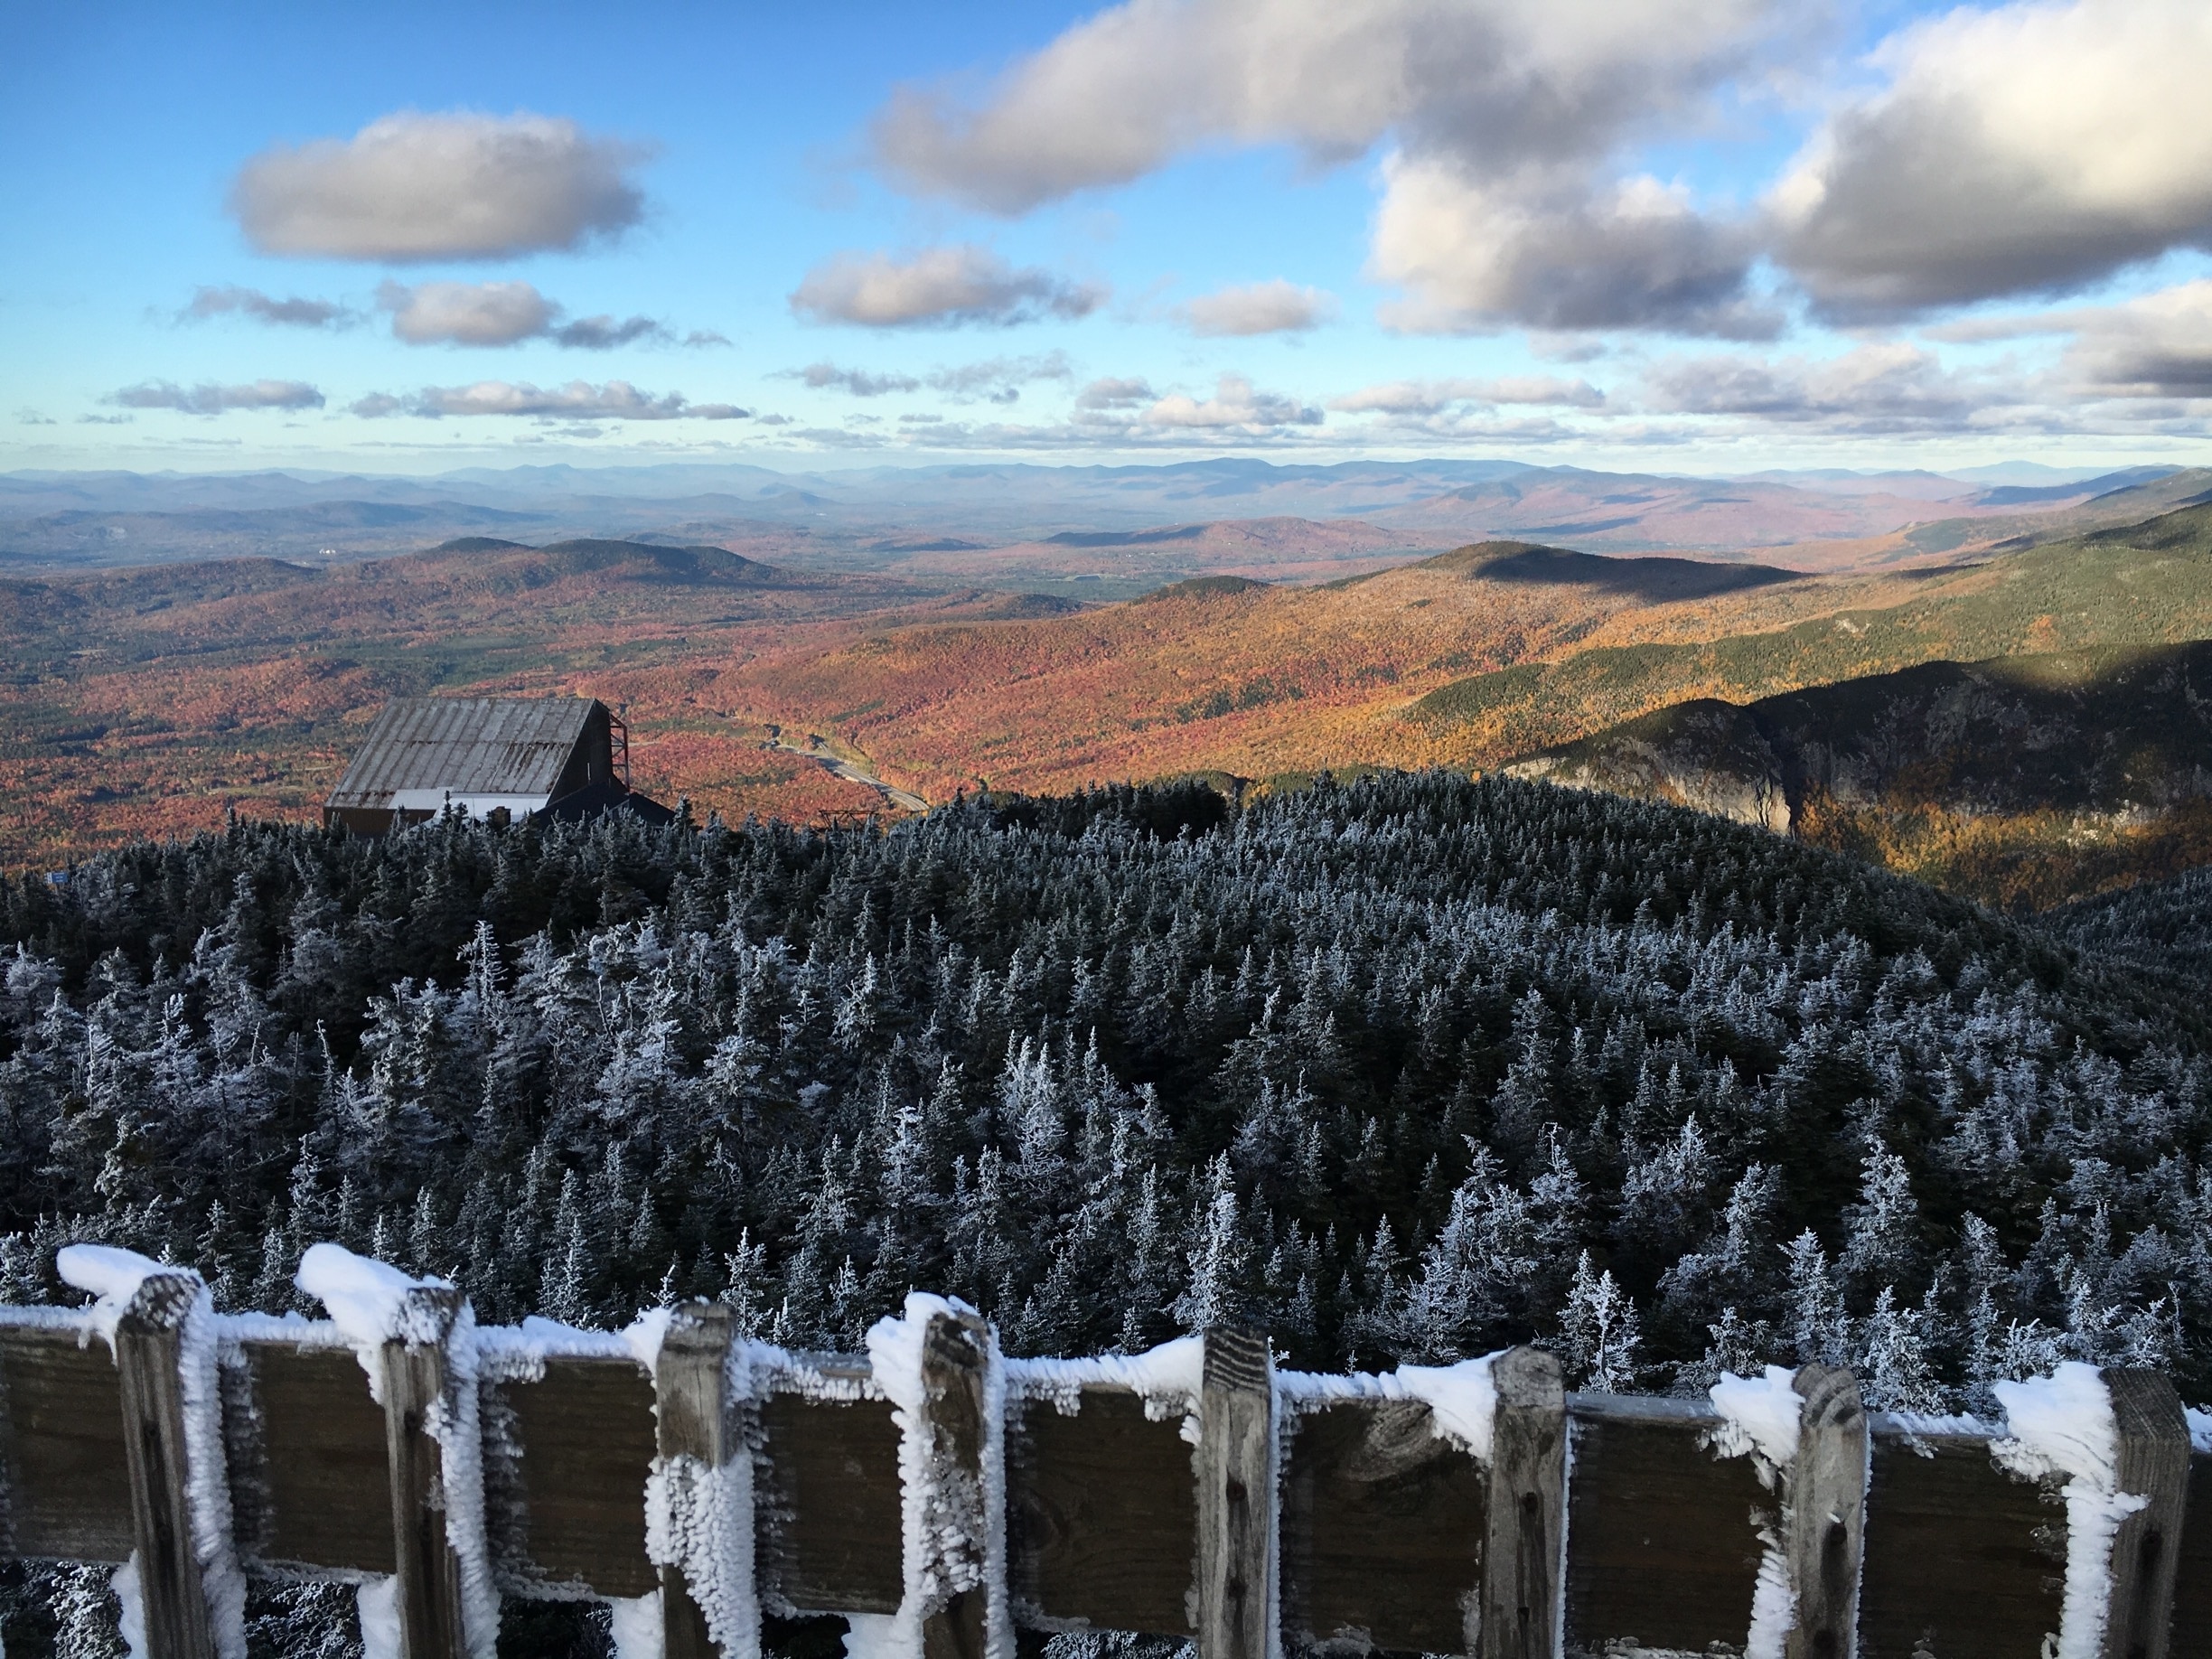 360 degrees stunning views. Arguably one of the best views in the White Mountains. 